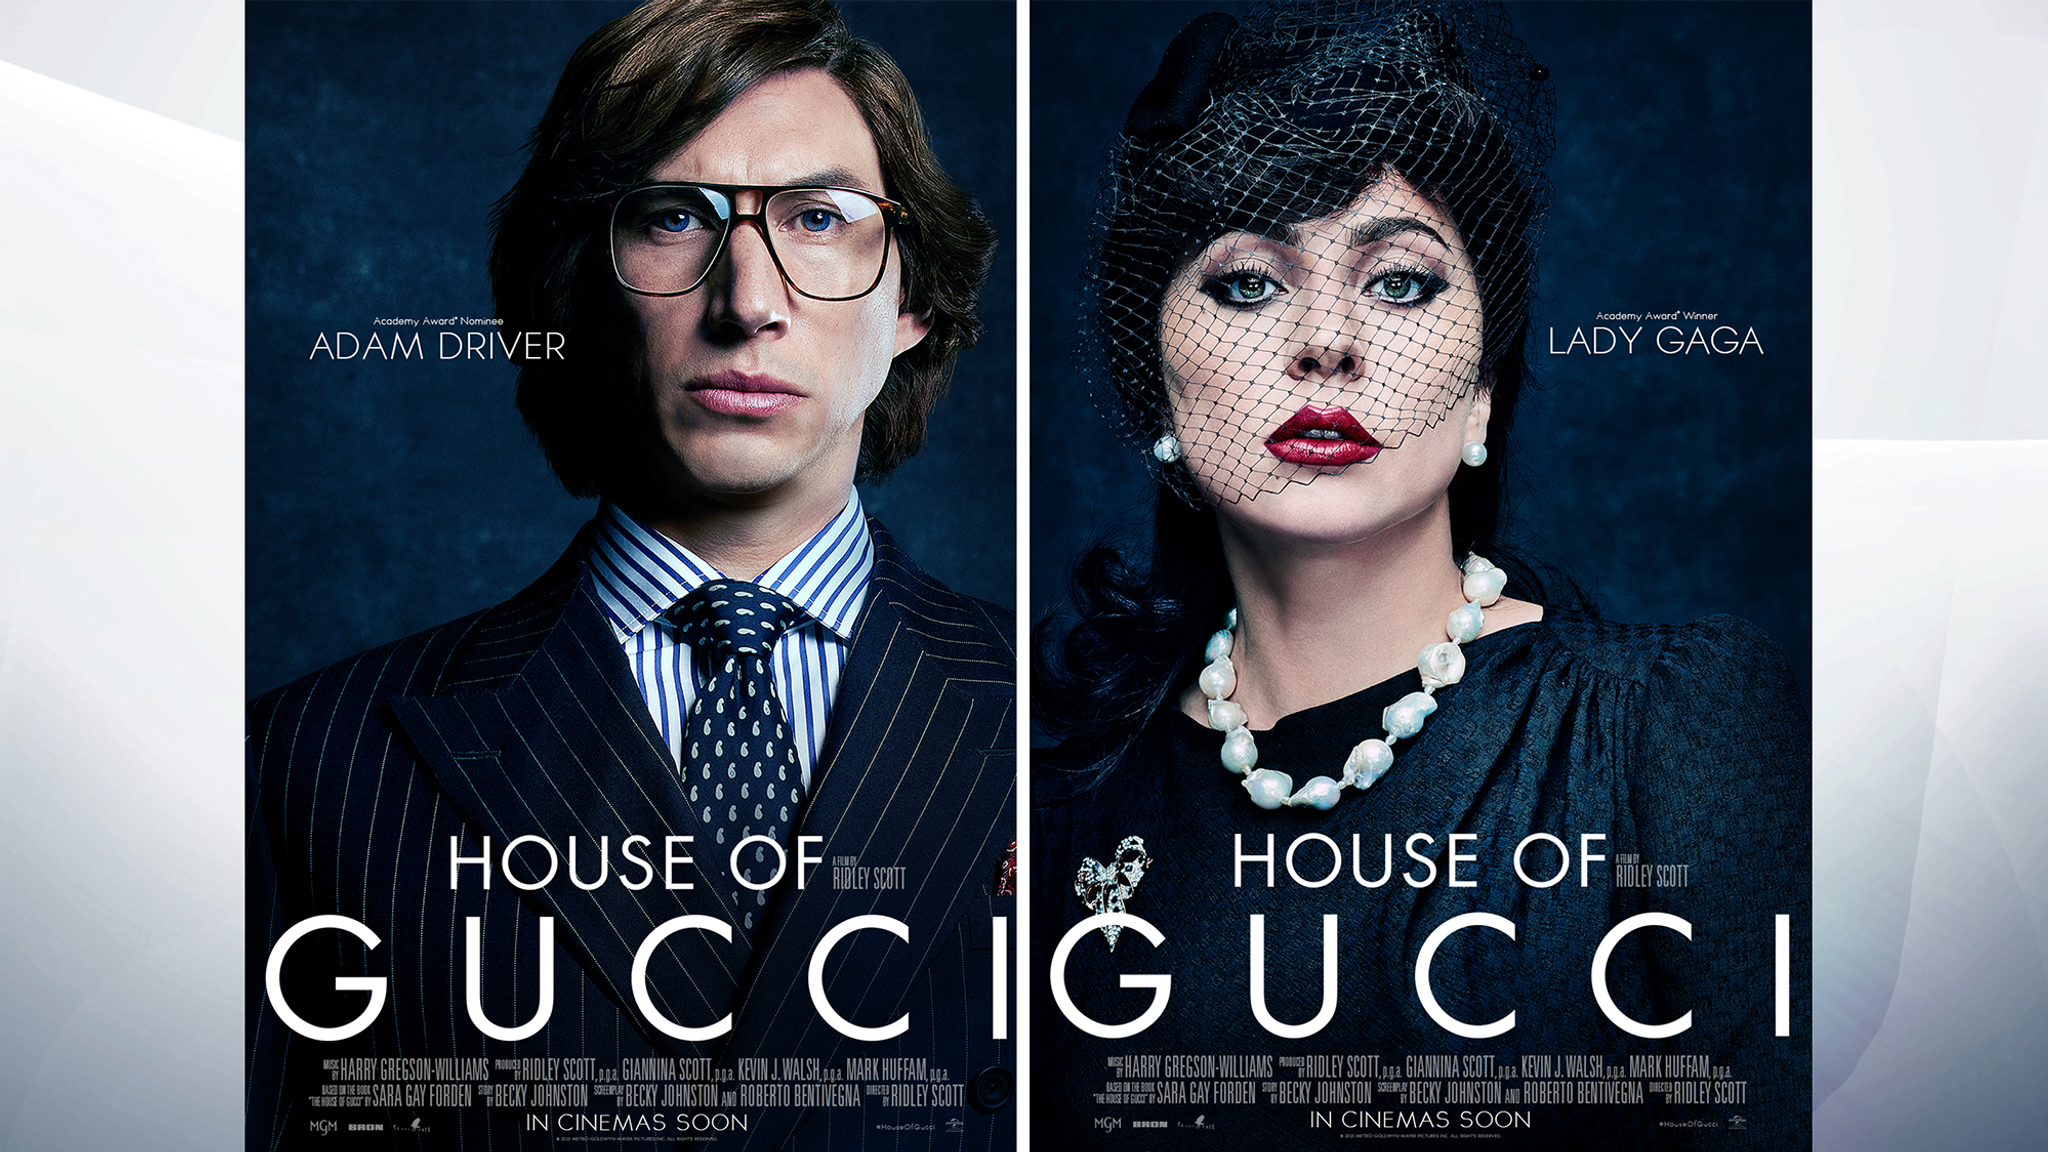 House of gucci movie